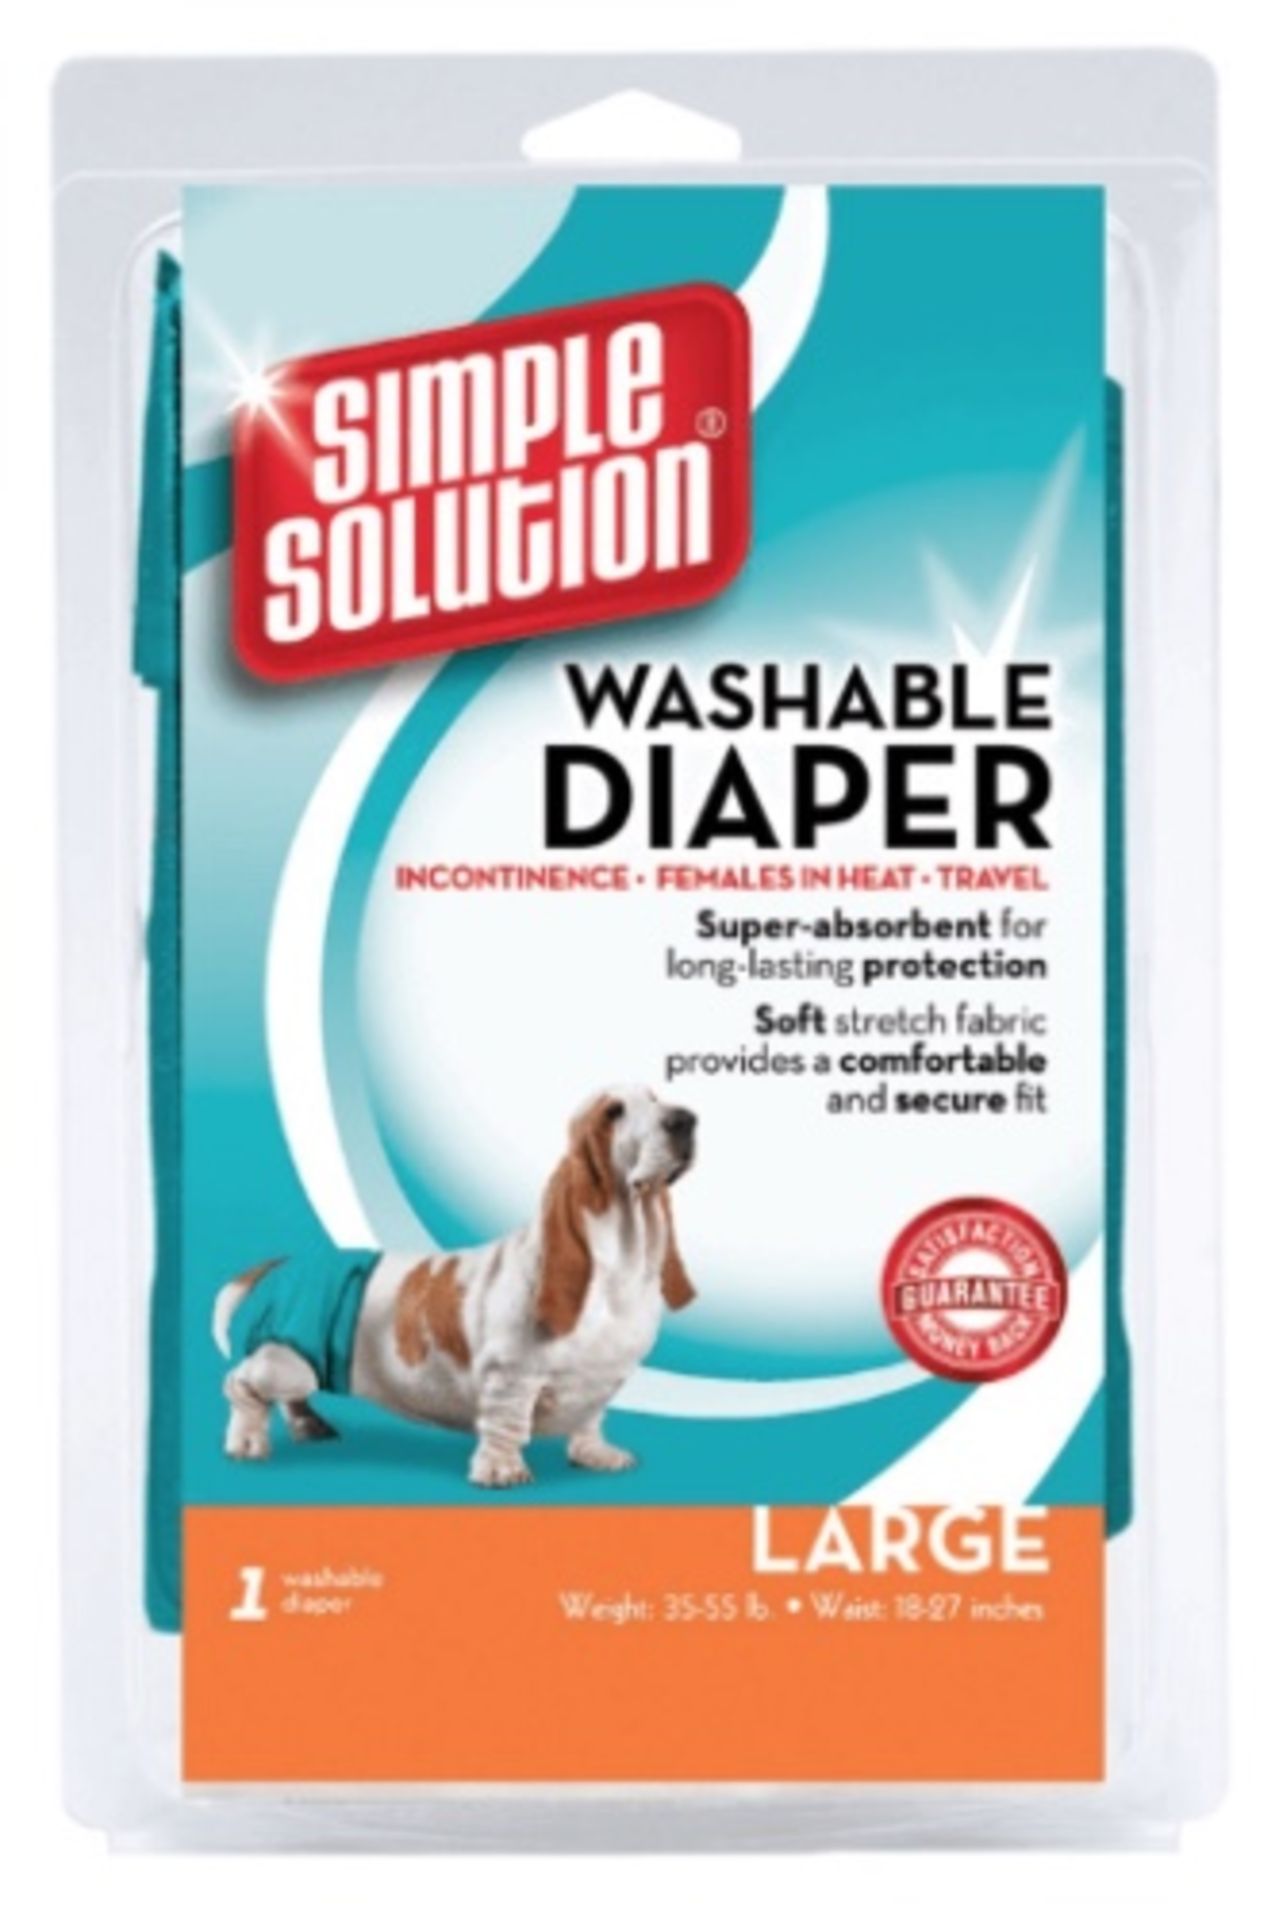 6 x Large Dog Nappy, WashabIe, Incontinence, Female in Heat no vat on hammer.You will get 6 packs.